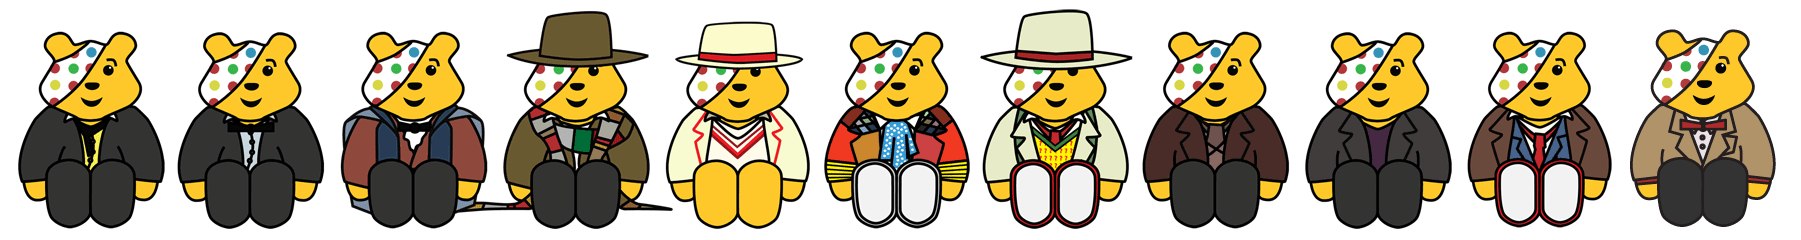 Pudsey Bear Poster Template